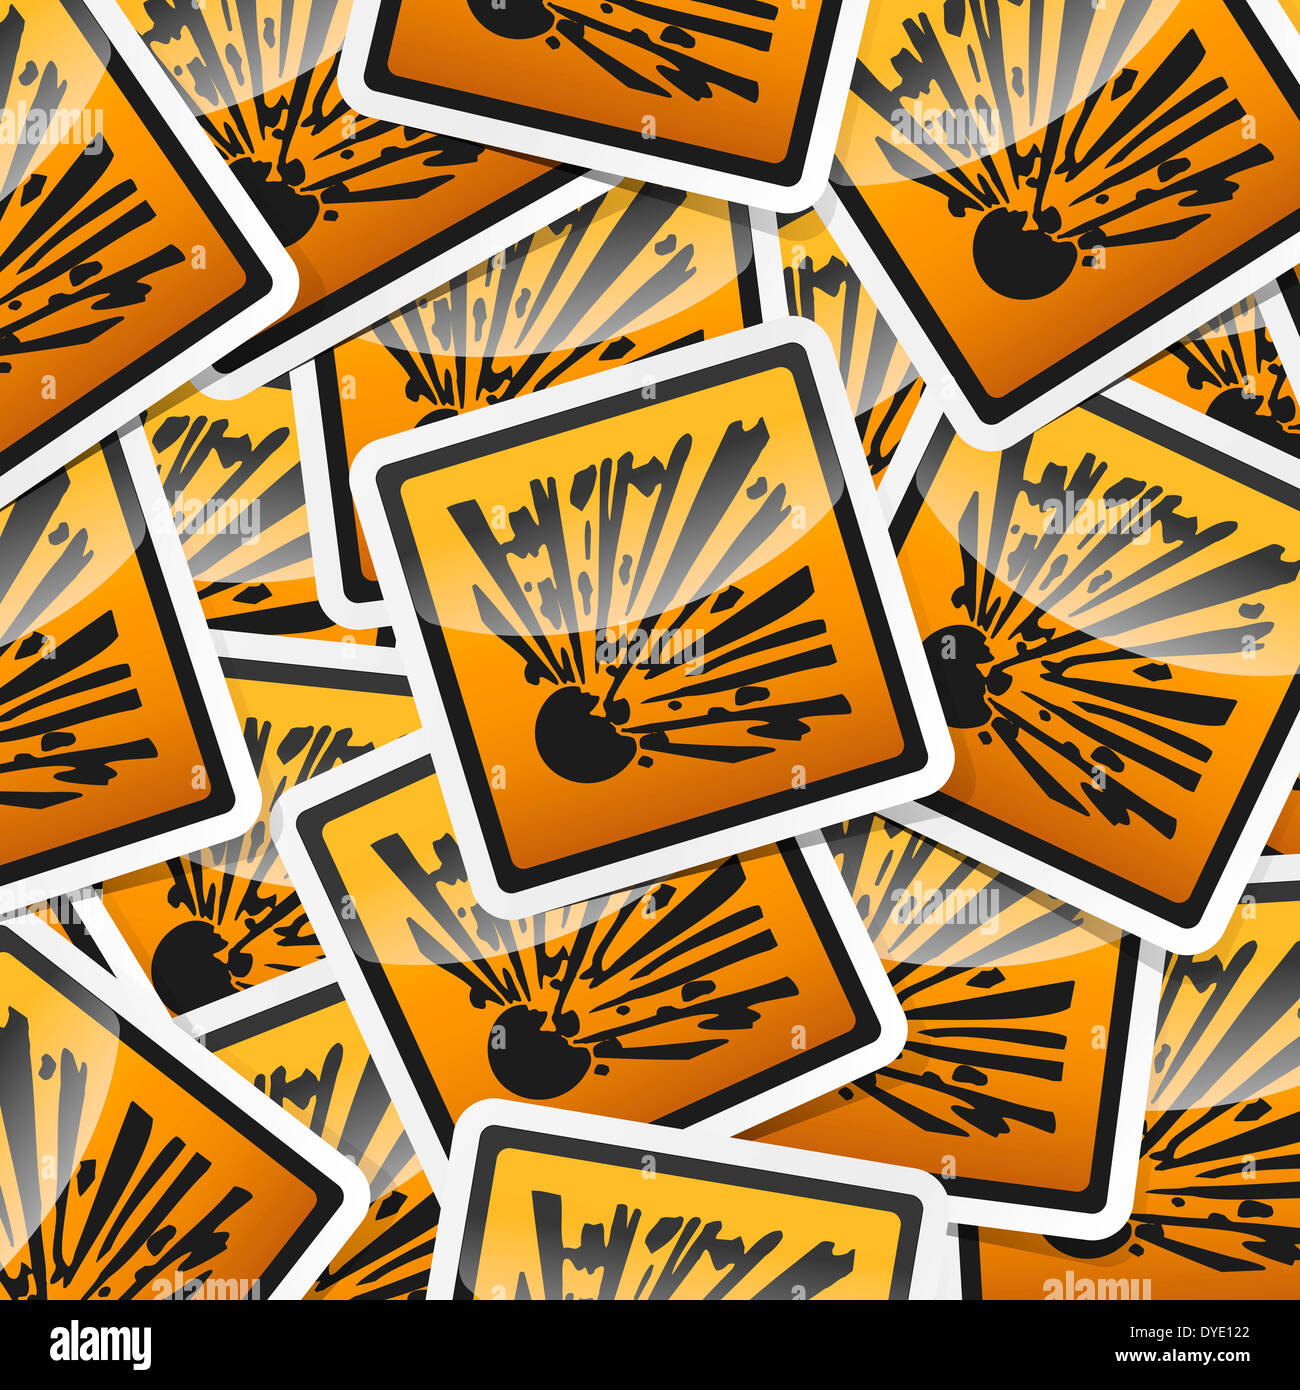 Danger, hazard sign, icon sticker style collection with shadow. Stock Photo